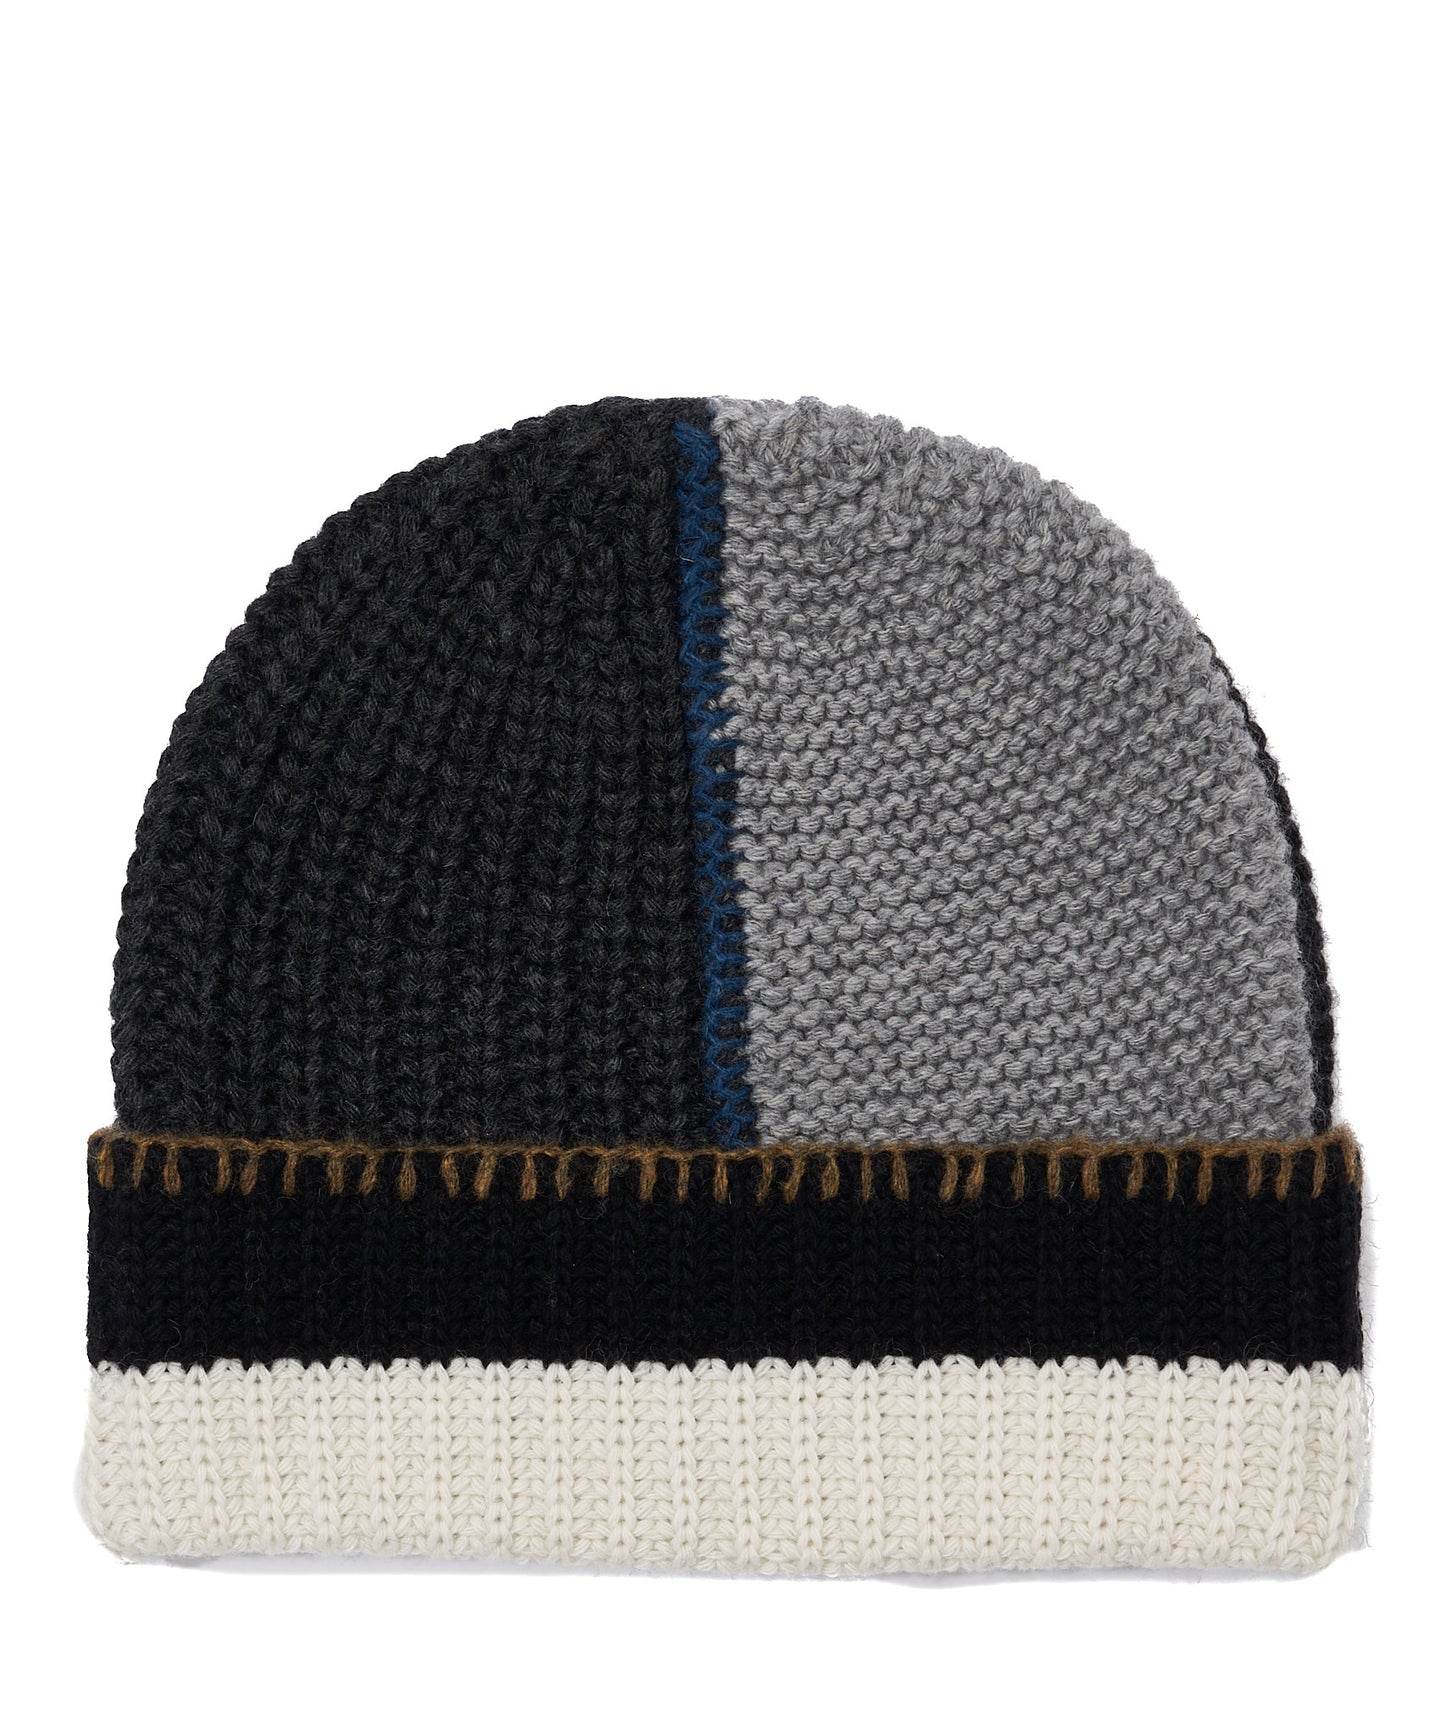 Patchwork Beanie in color Black